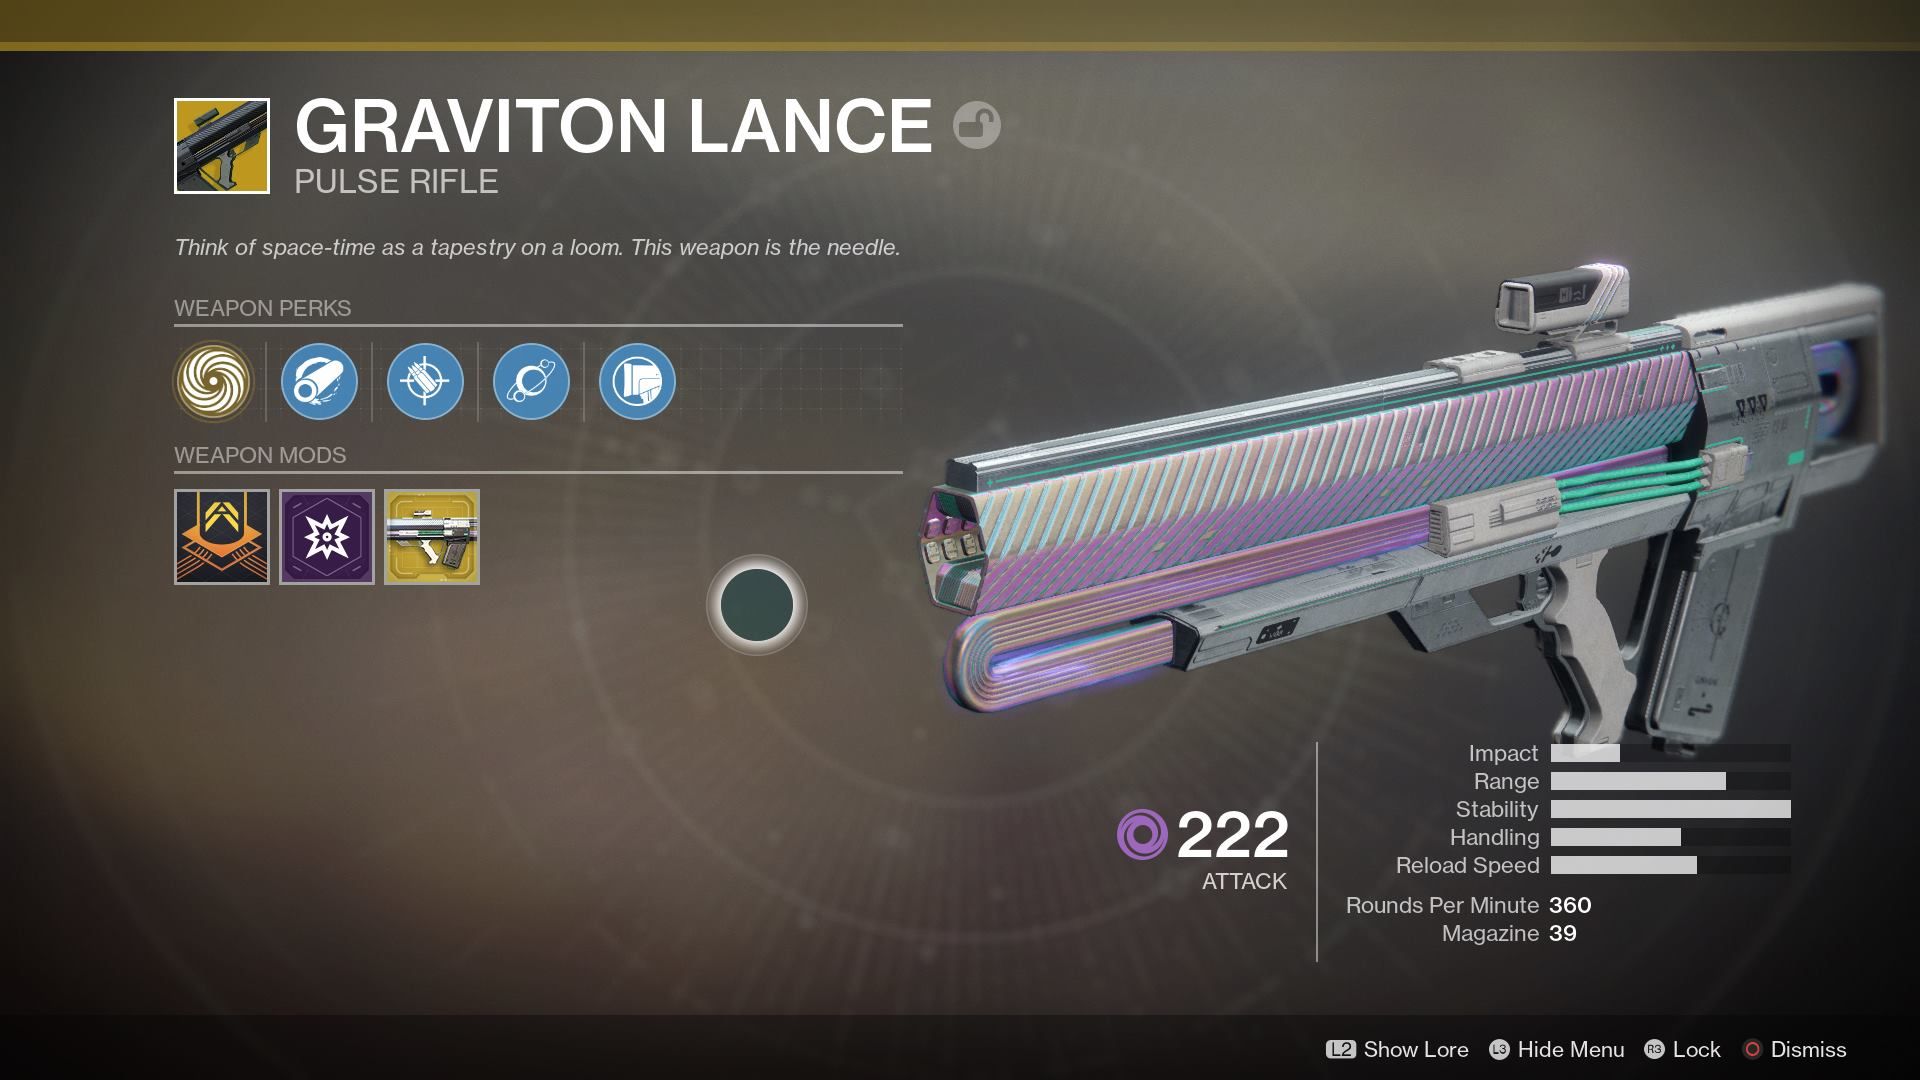 Since this week Xur has brought Graviton Lance to the EDZ we thought it was...